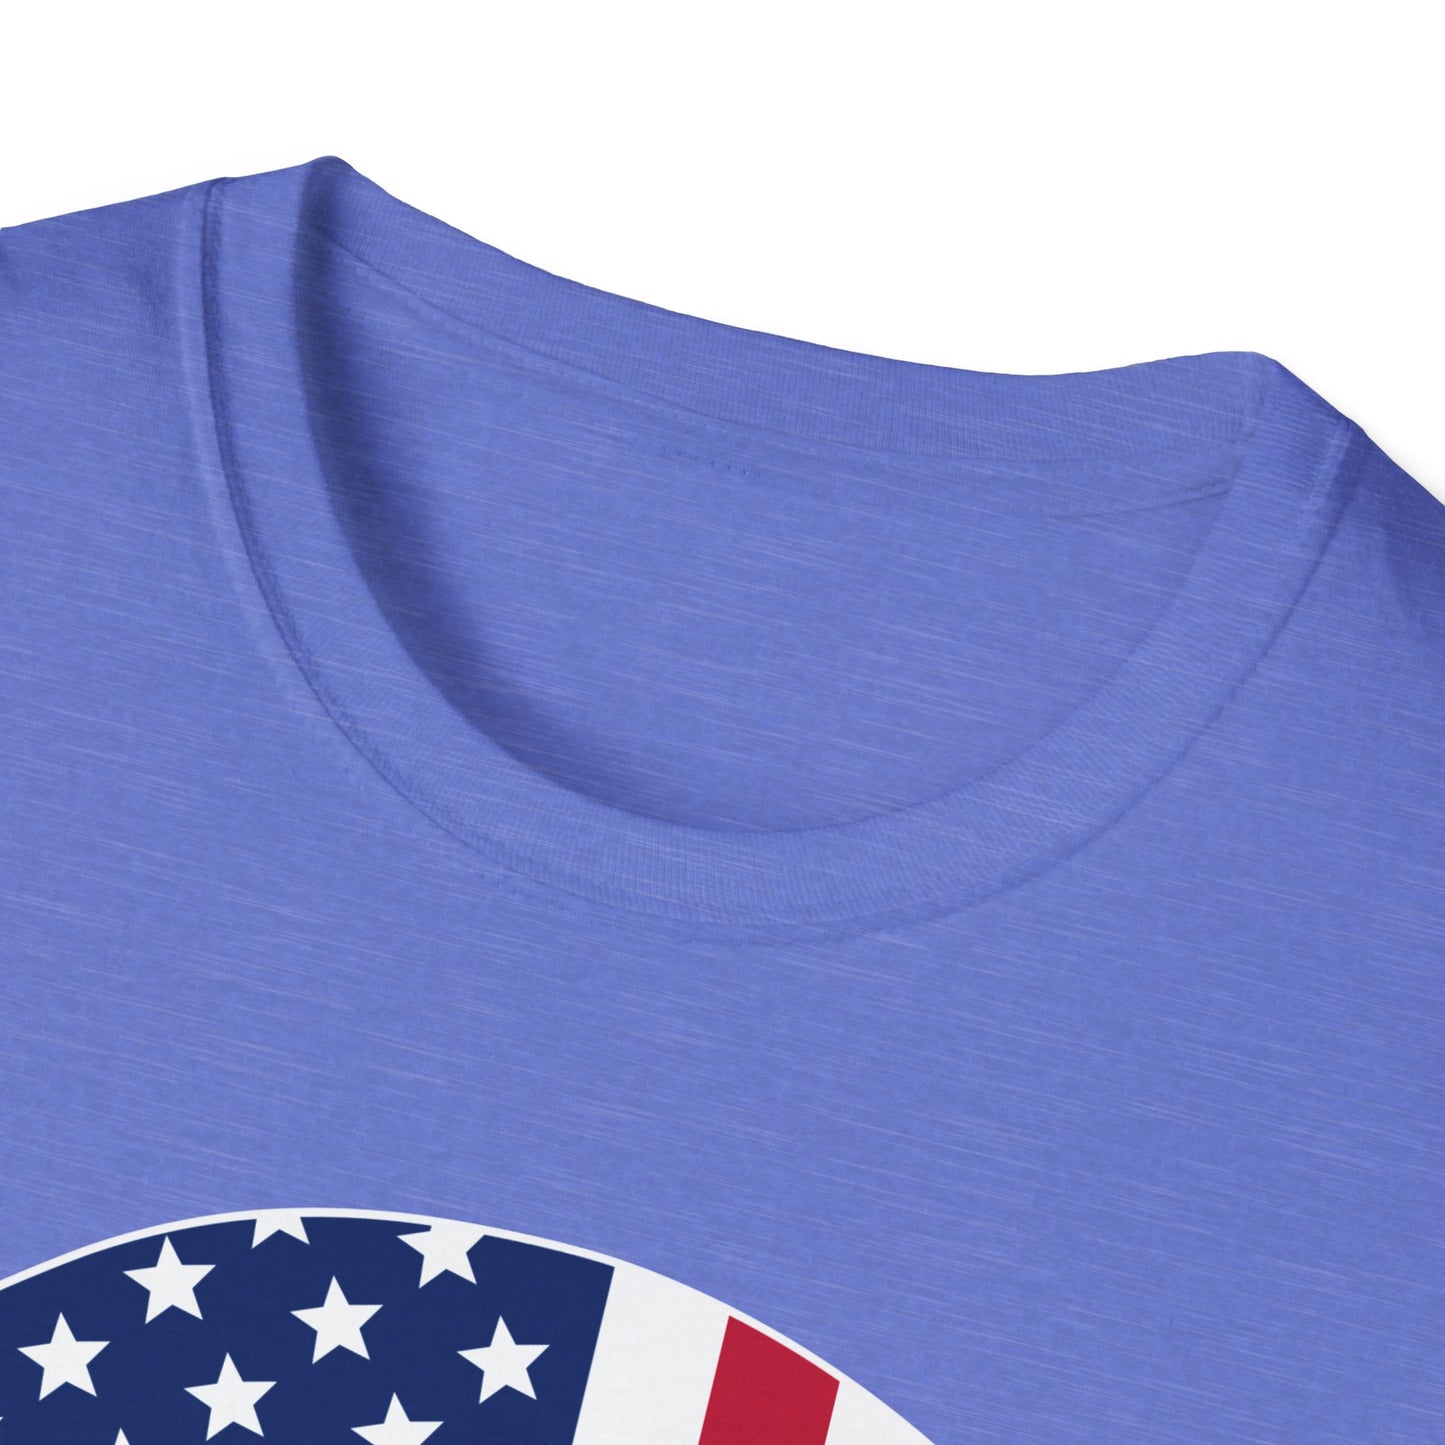 American Skull Flag Color - Unisex Softstyle T-Shirt